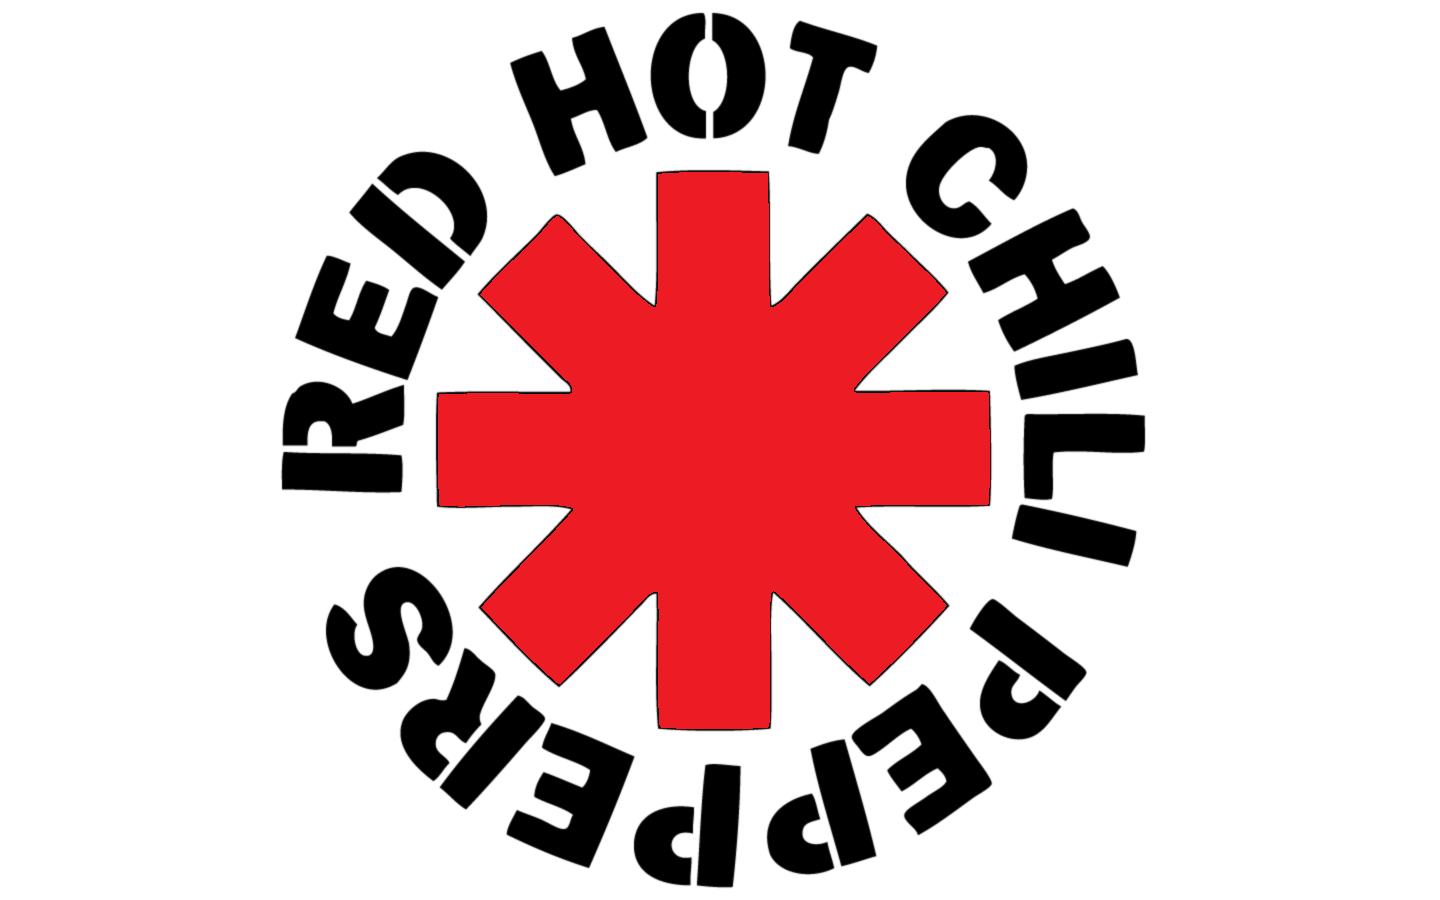 Red hot chili peppers love. RHCP эмблема. Red hot Chili Peppers лого. Red hot Chili Peppers знак. Red hot Chili Peppers логотип группы.